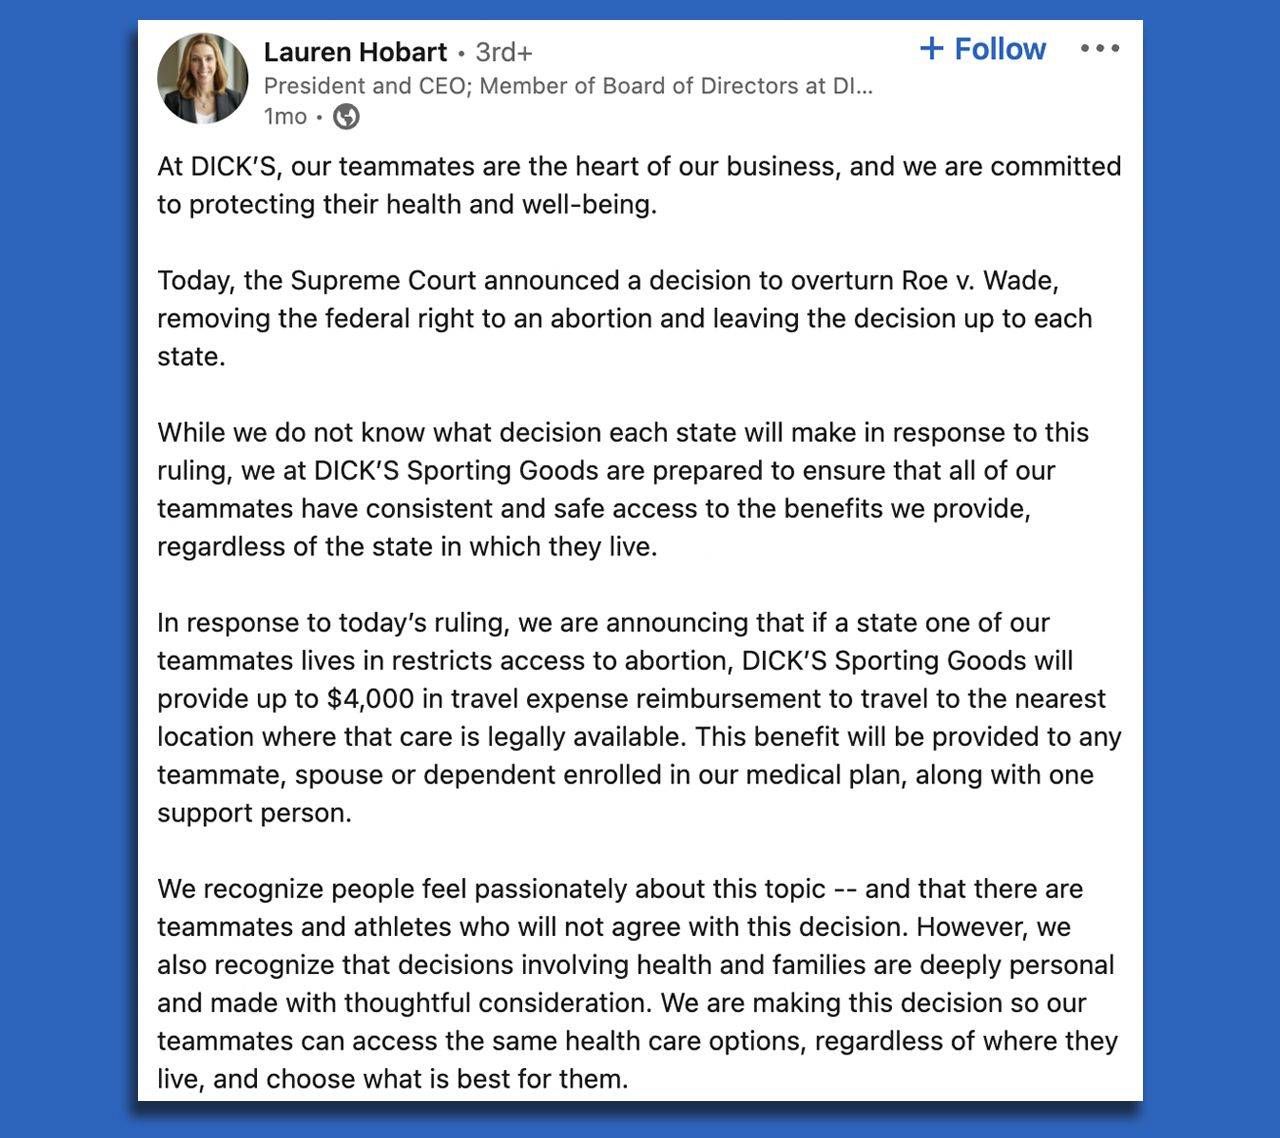 LinkedIn post from Dick's CEO Lauren Hobart in response to the overturn of Roe v. Wade